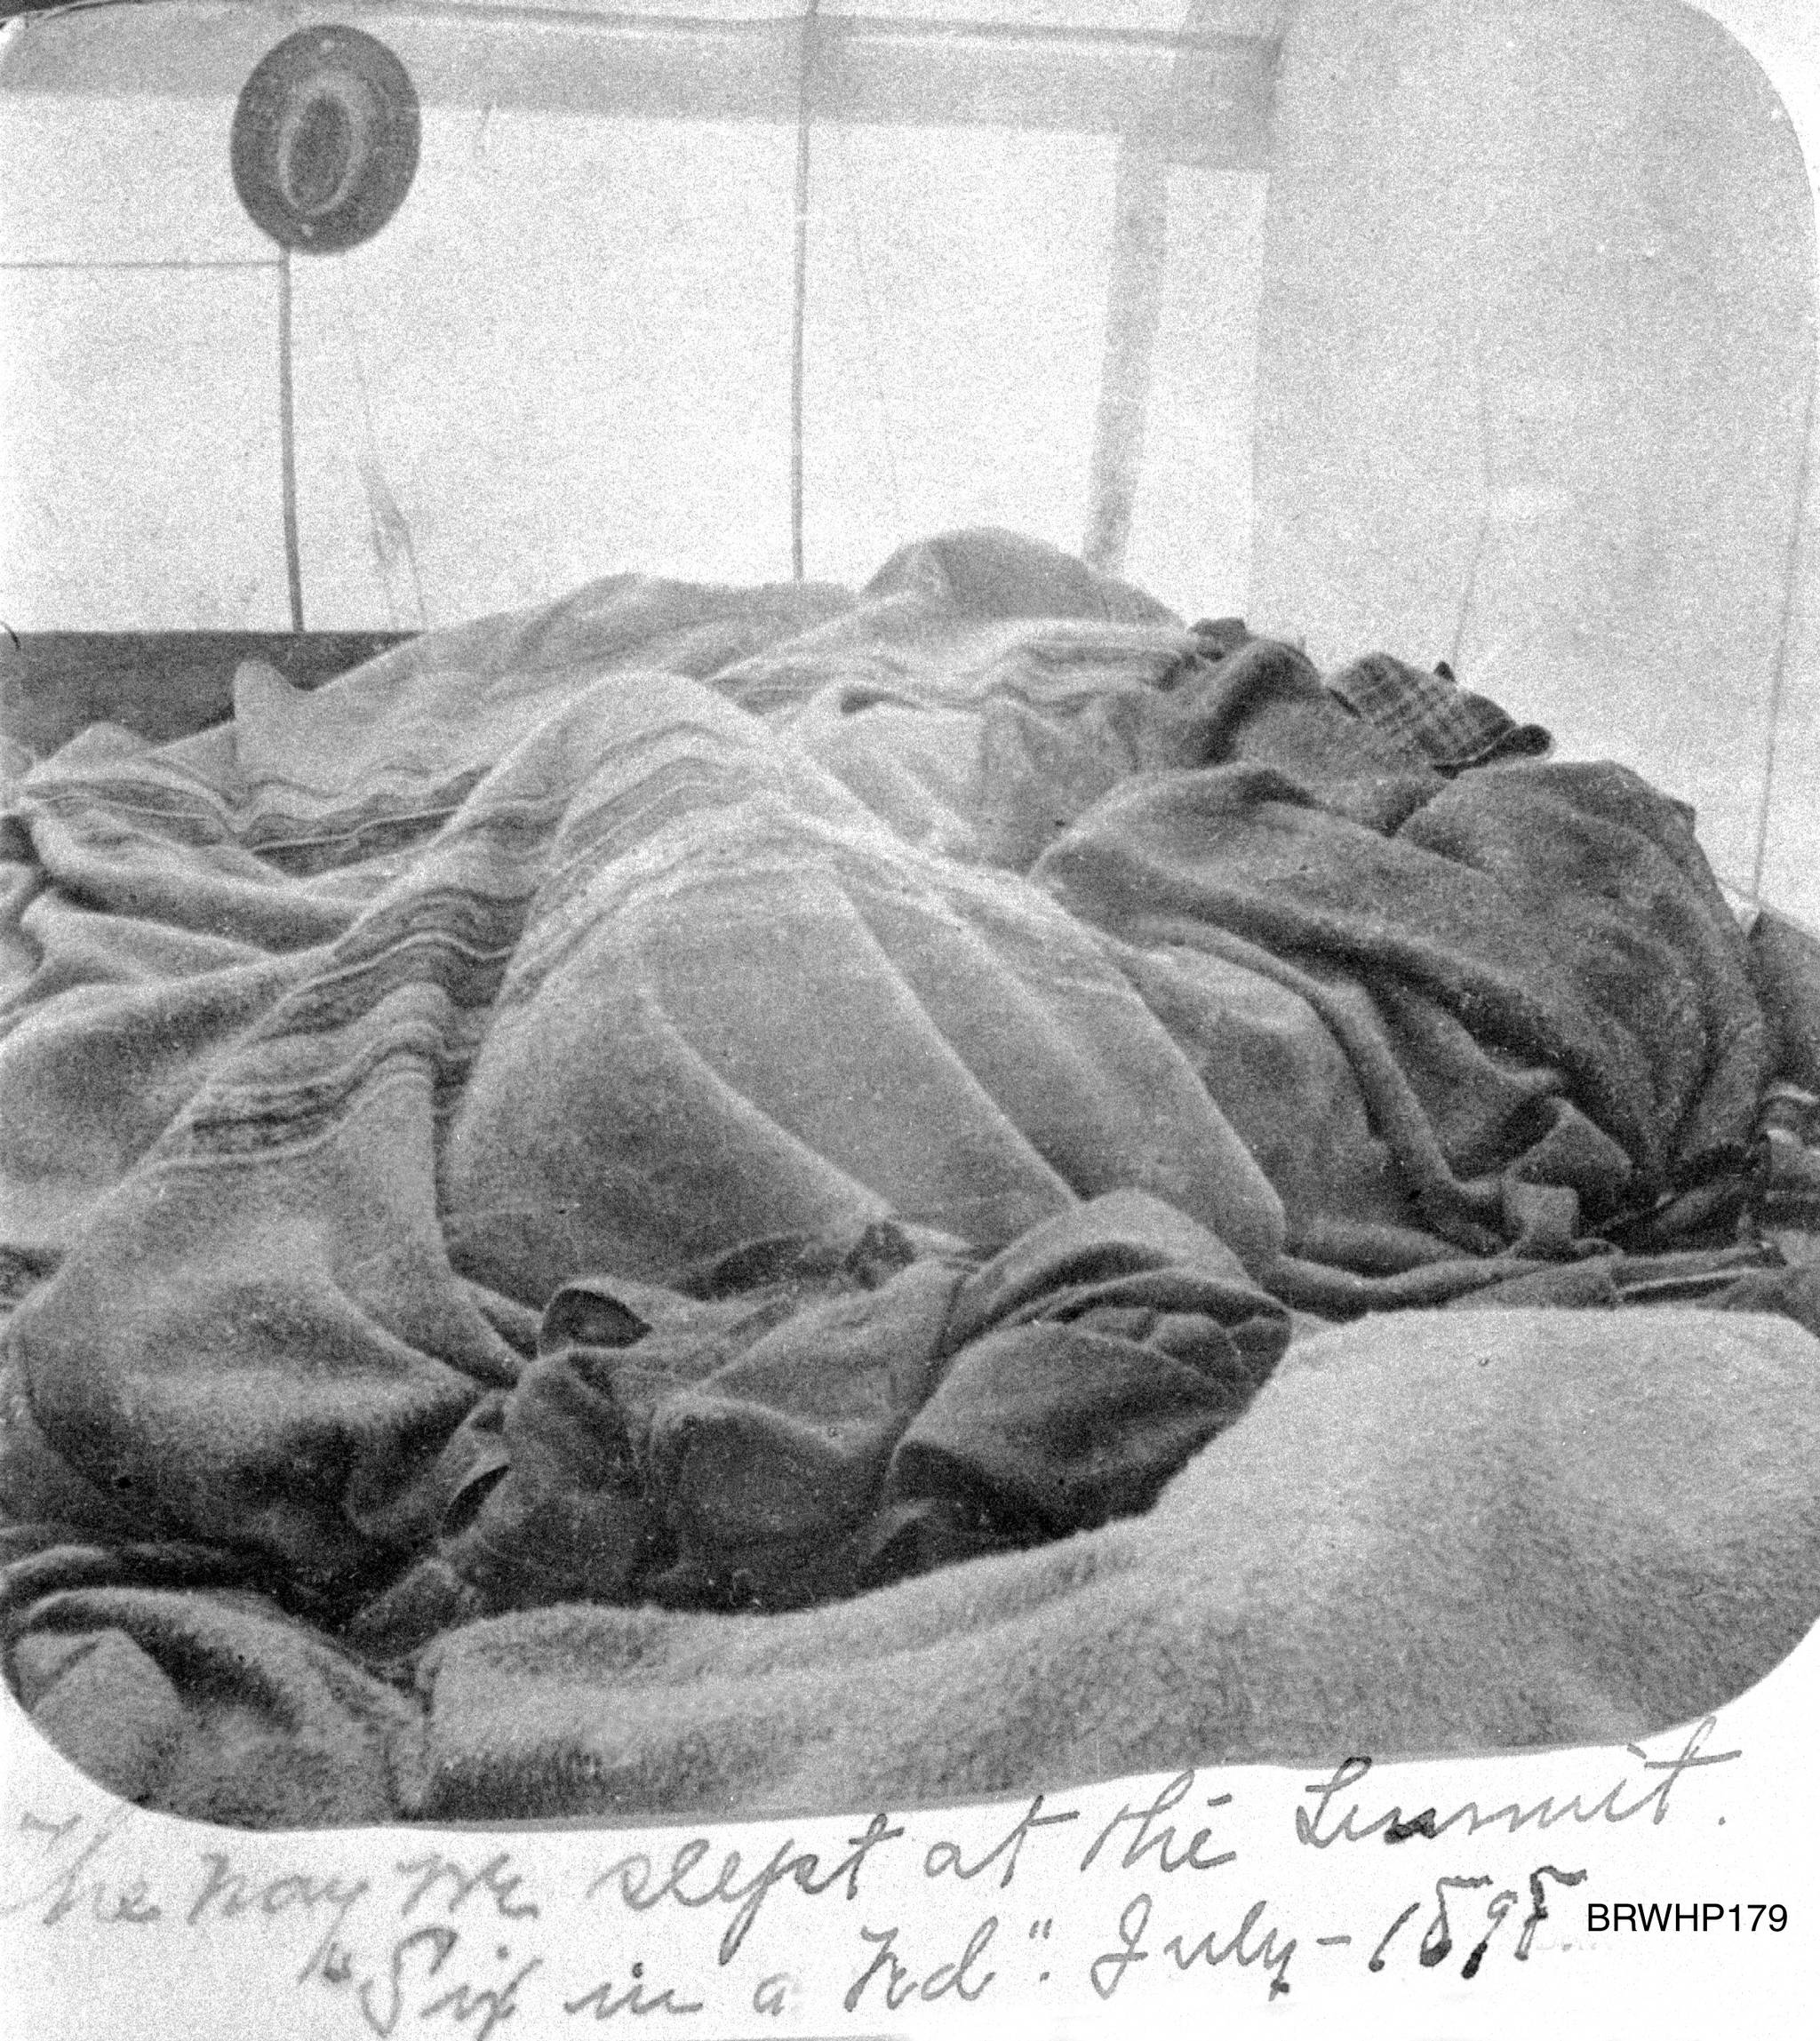 “The way we slept at the Summit, six in a bed.” The Brackett family asleep in a tent at the summit of the White Pass Trail some 20 miles north of Skagway, circa July 1898. (Courtesy Photo | National Park Service, Klondike Gold Rush National Historical Park, Brackett Family Collection, BRWHP179, KLGO WS-58-5311)